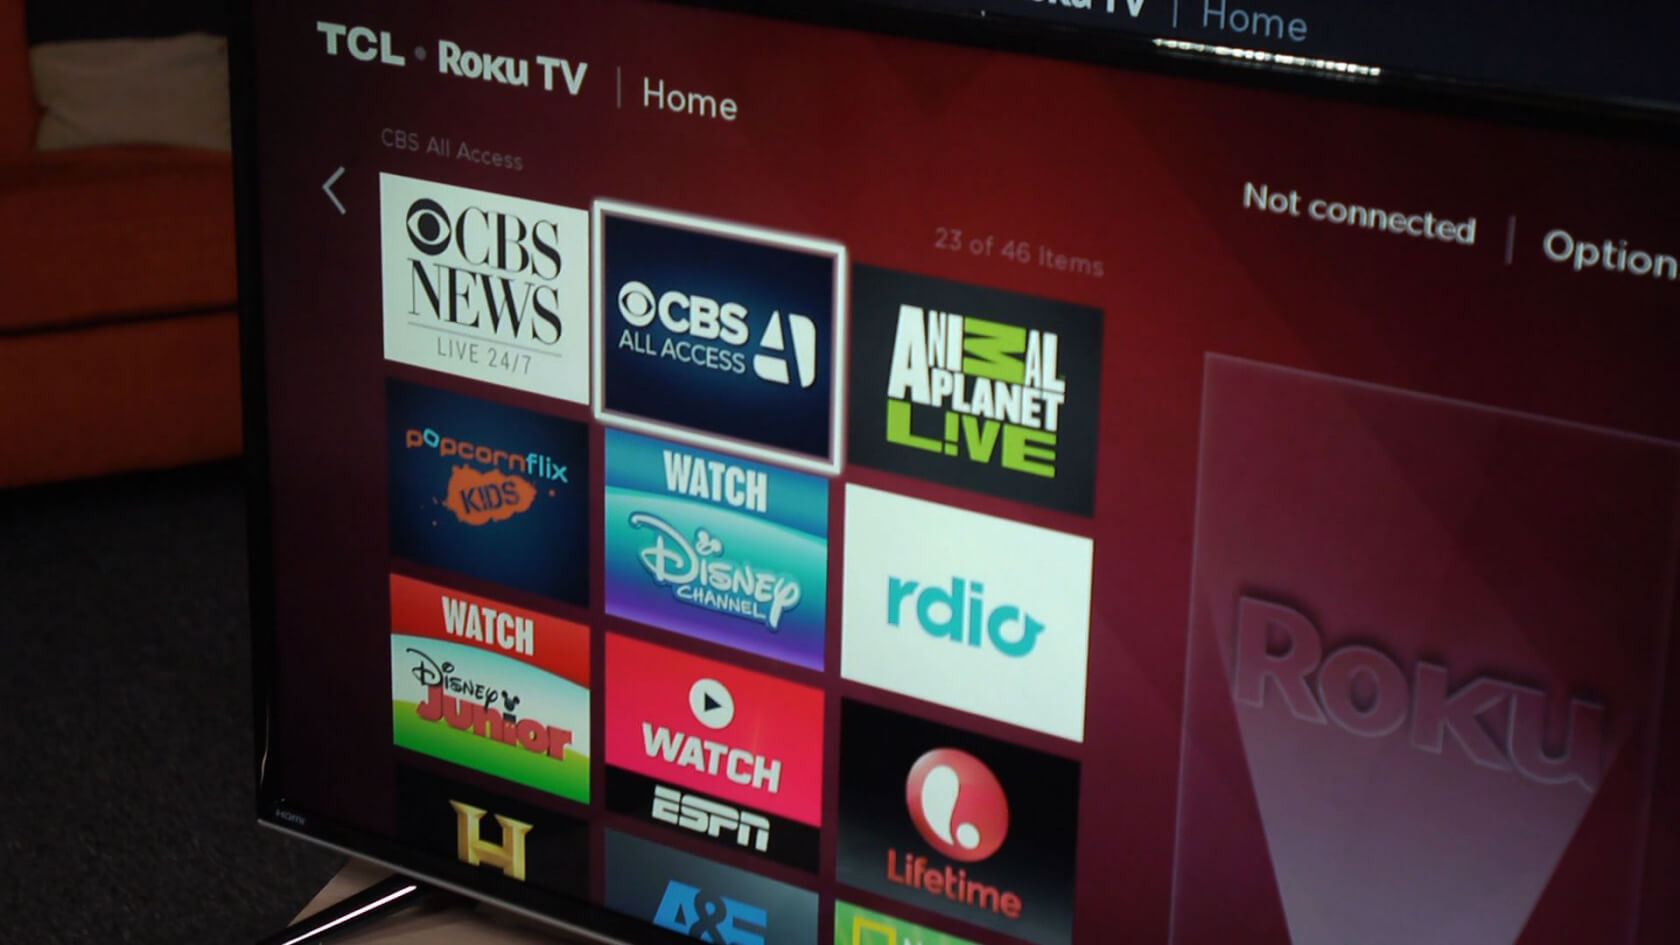 FBI reminds people that smart TVs can be hacked